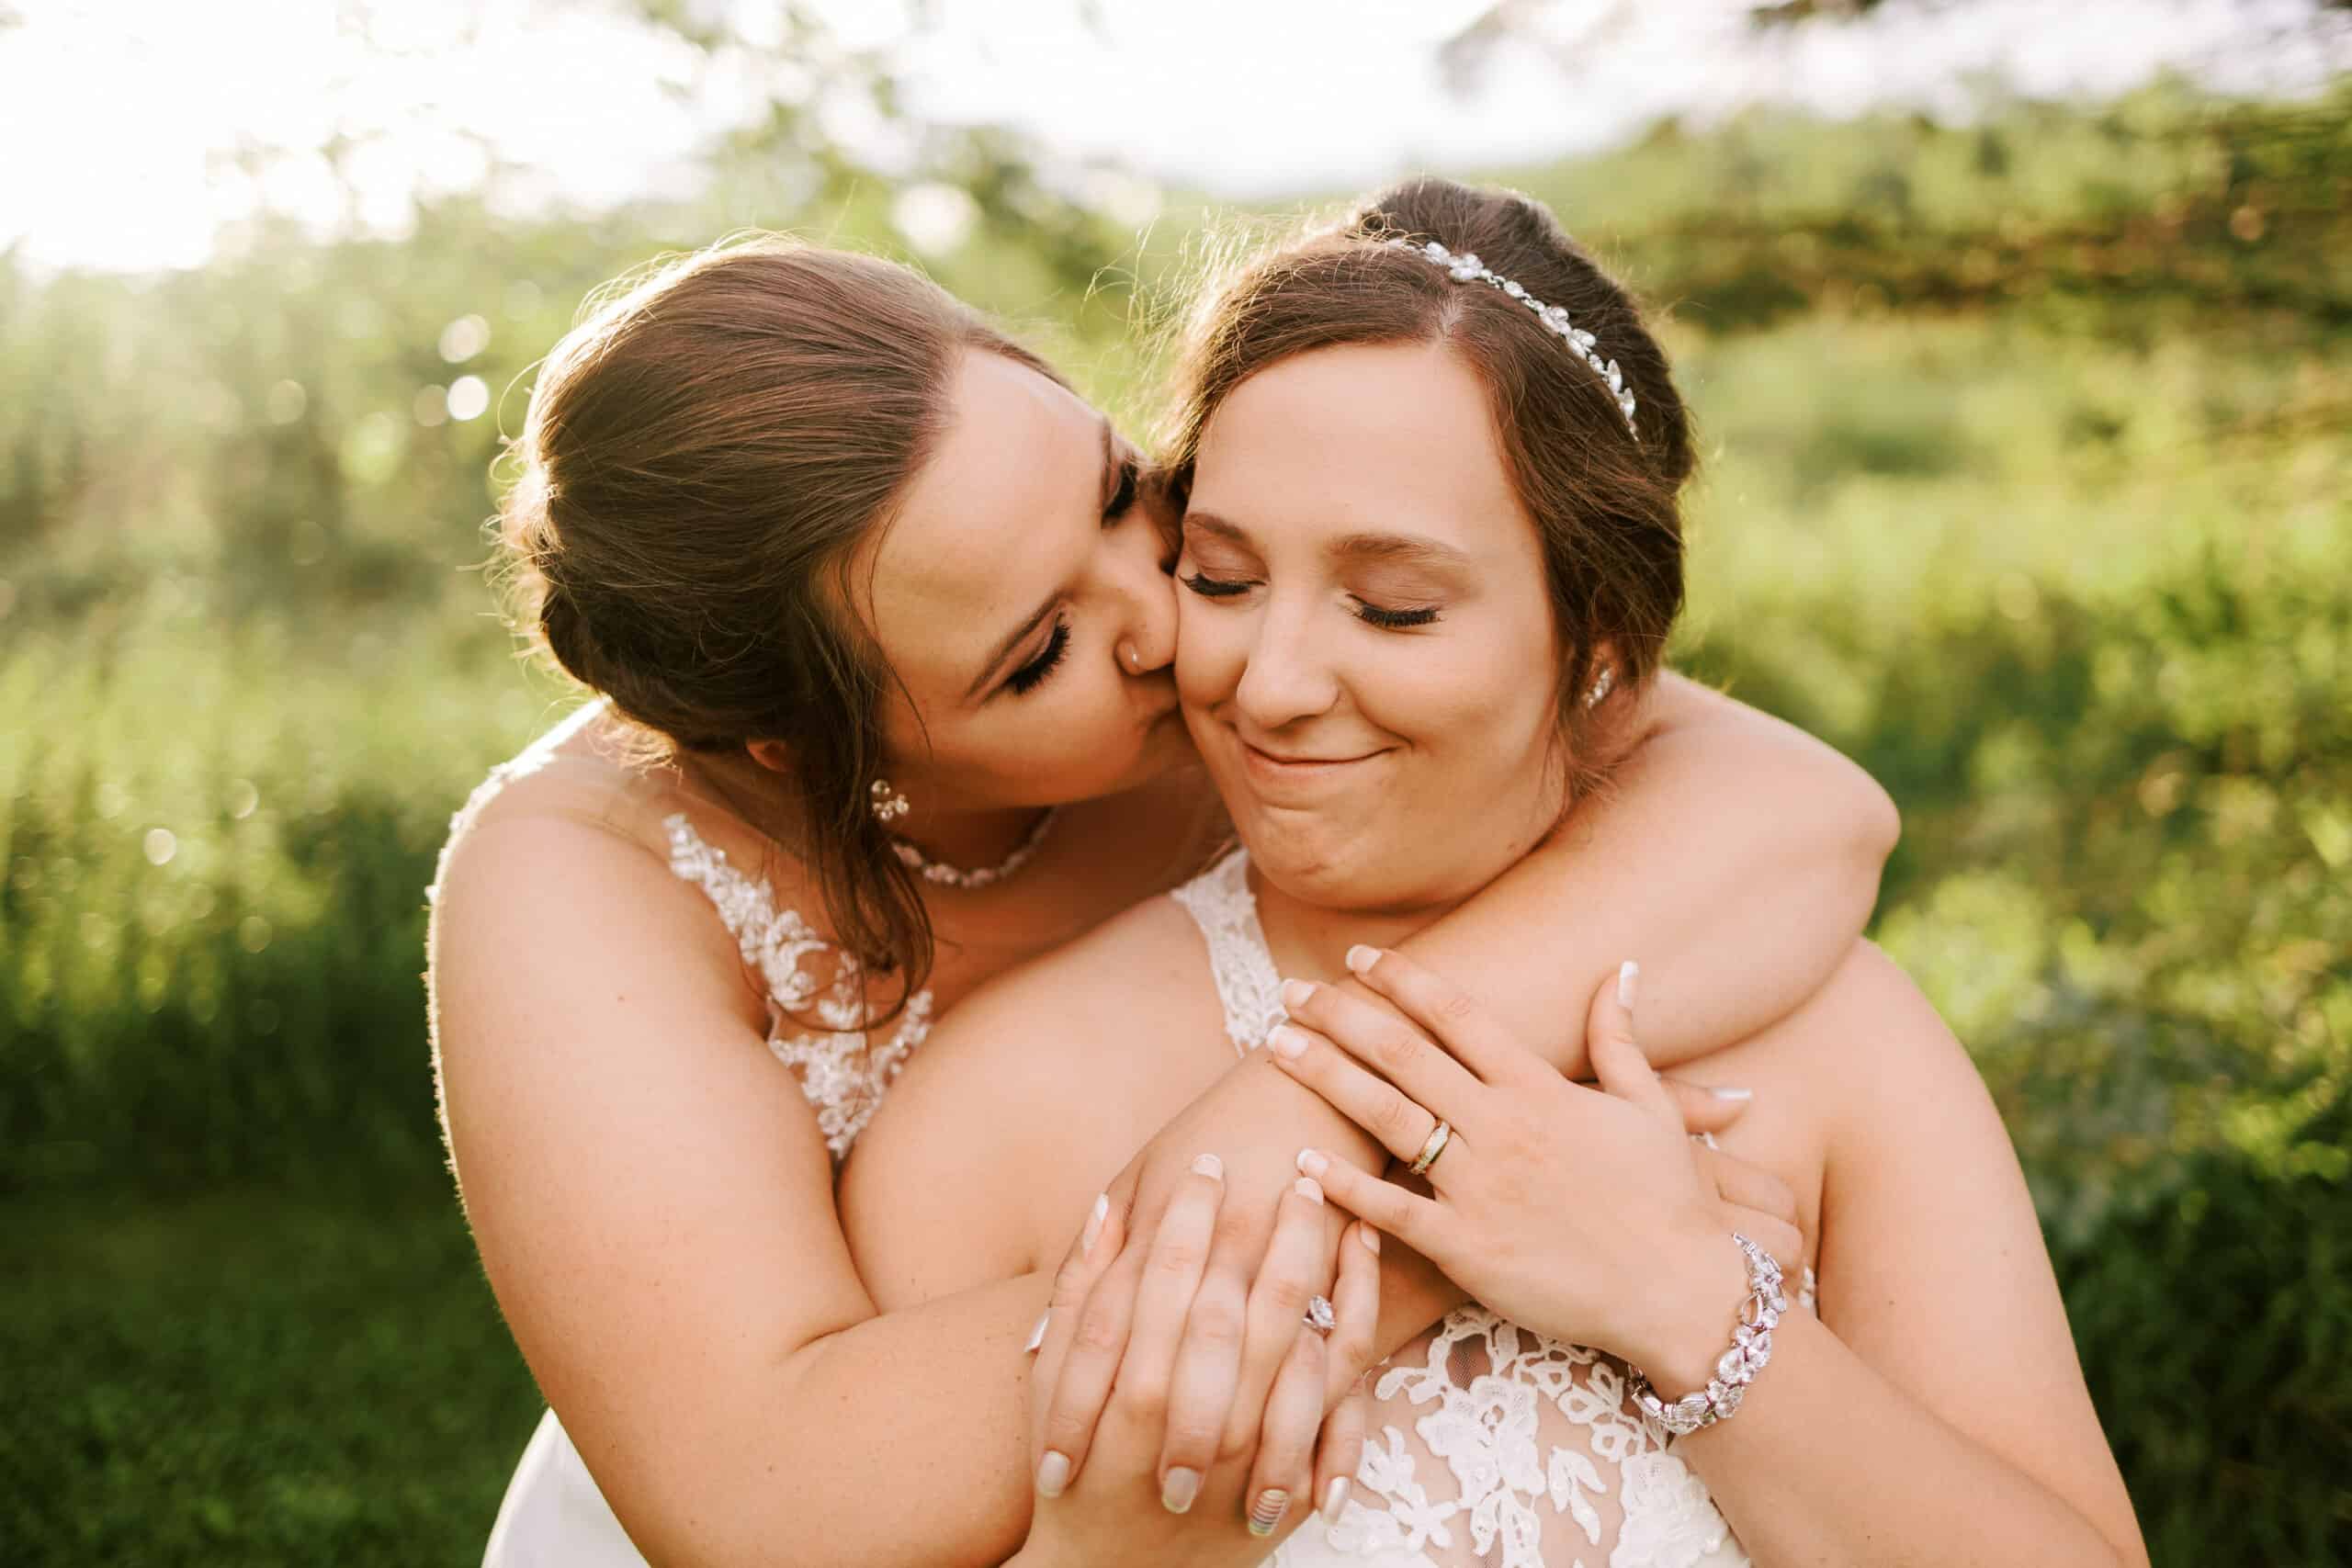 two brides embrace on their wedding day at rock ridge orchard in central wisconsin